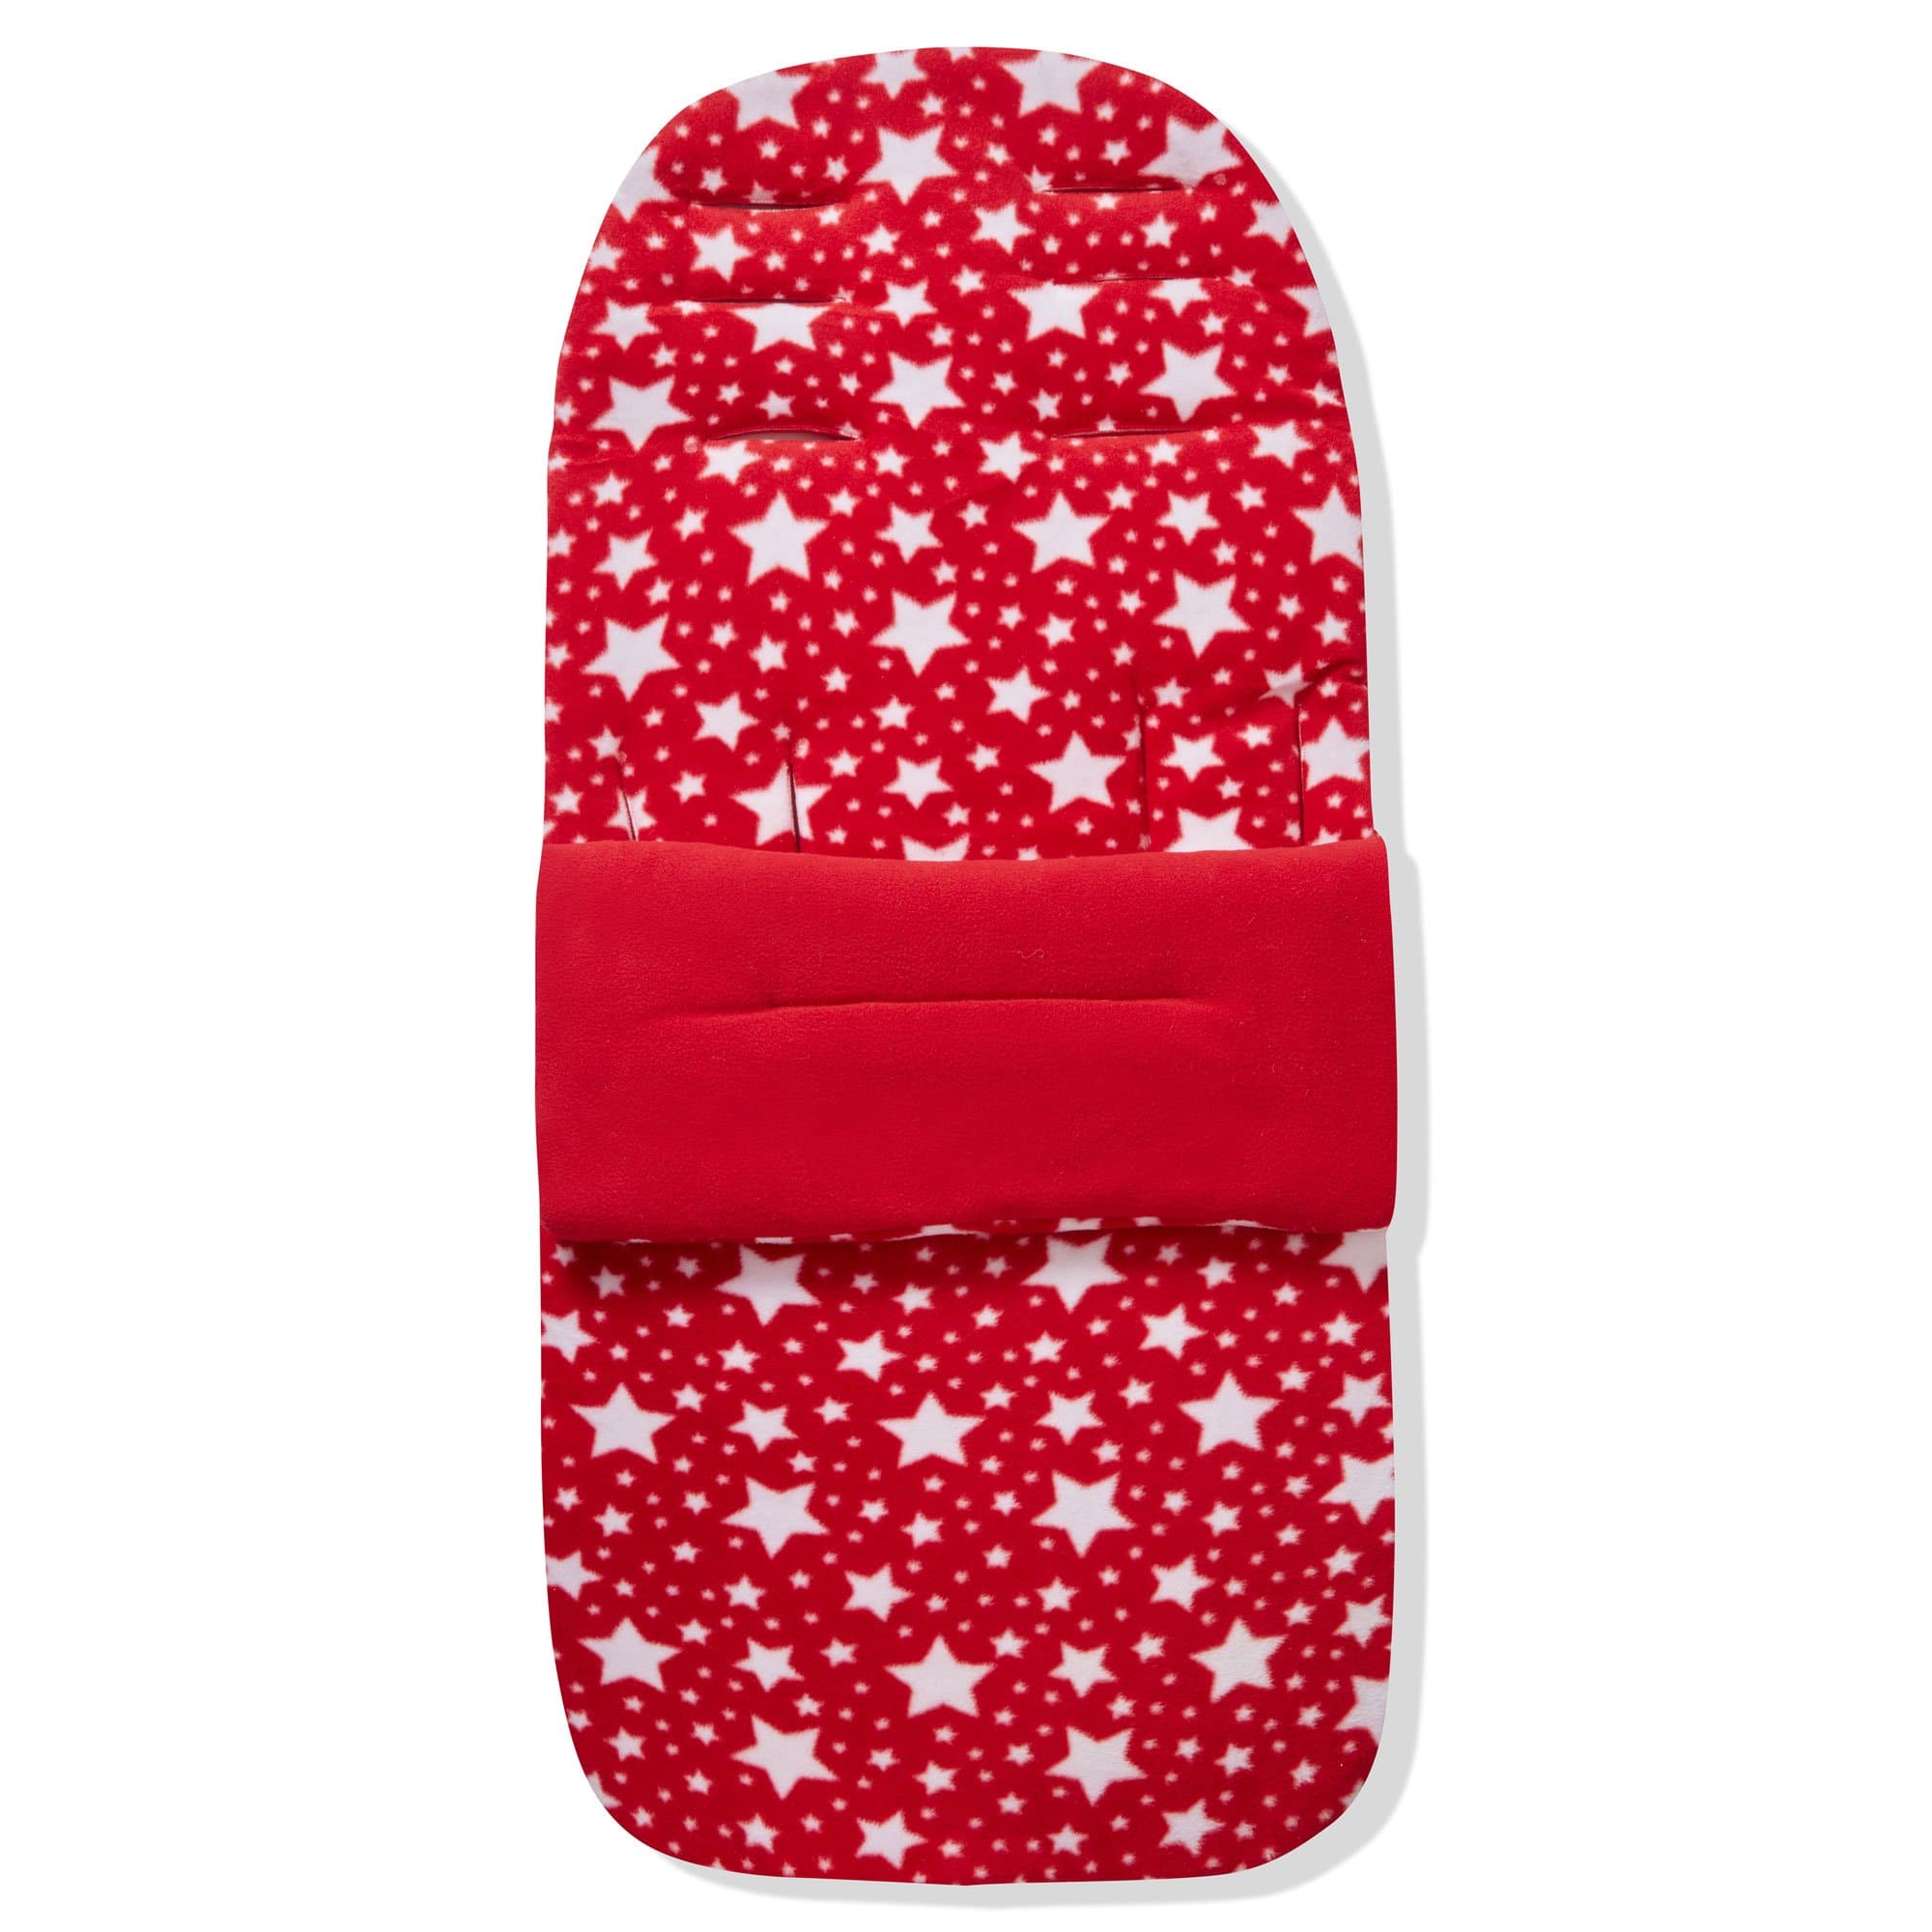 Fleece Footmuff / Cosy Toes Compatible With BabyCare - Red Star / Fits All Models | For Your Little One